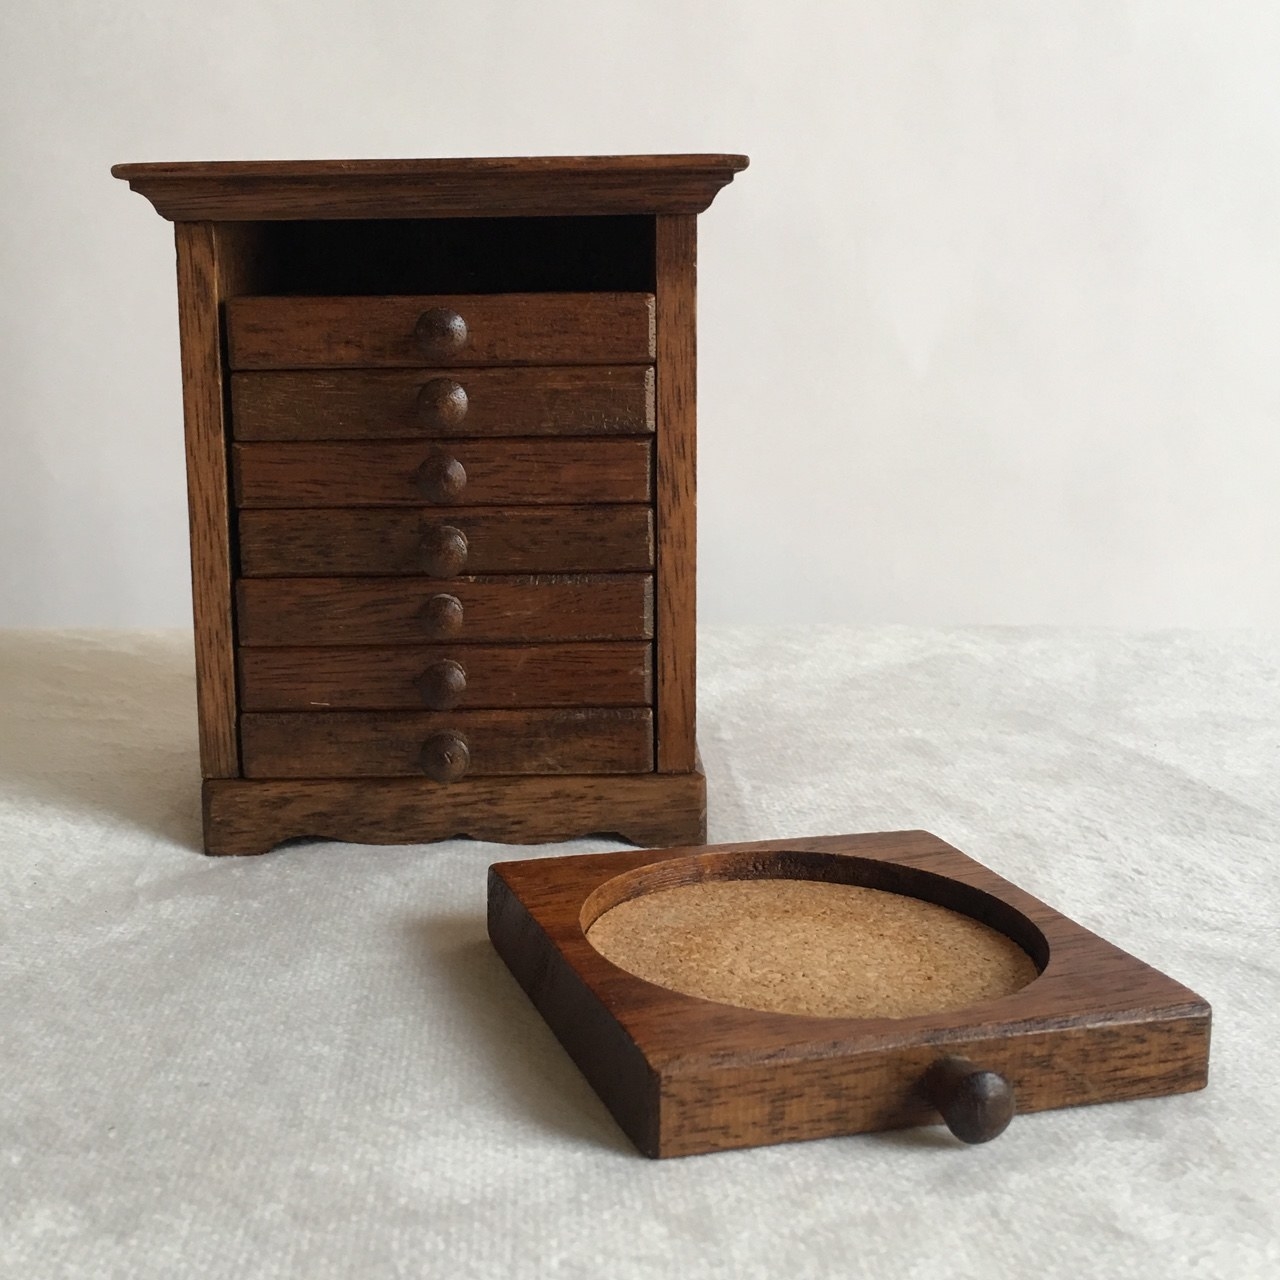 Vintage wooden coasters with cork and the small cabinet they fit into